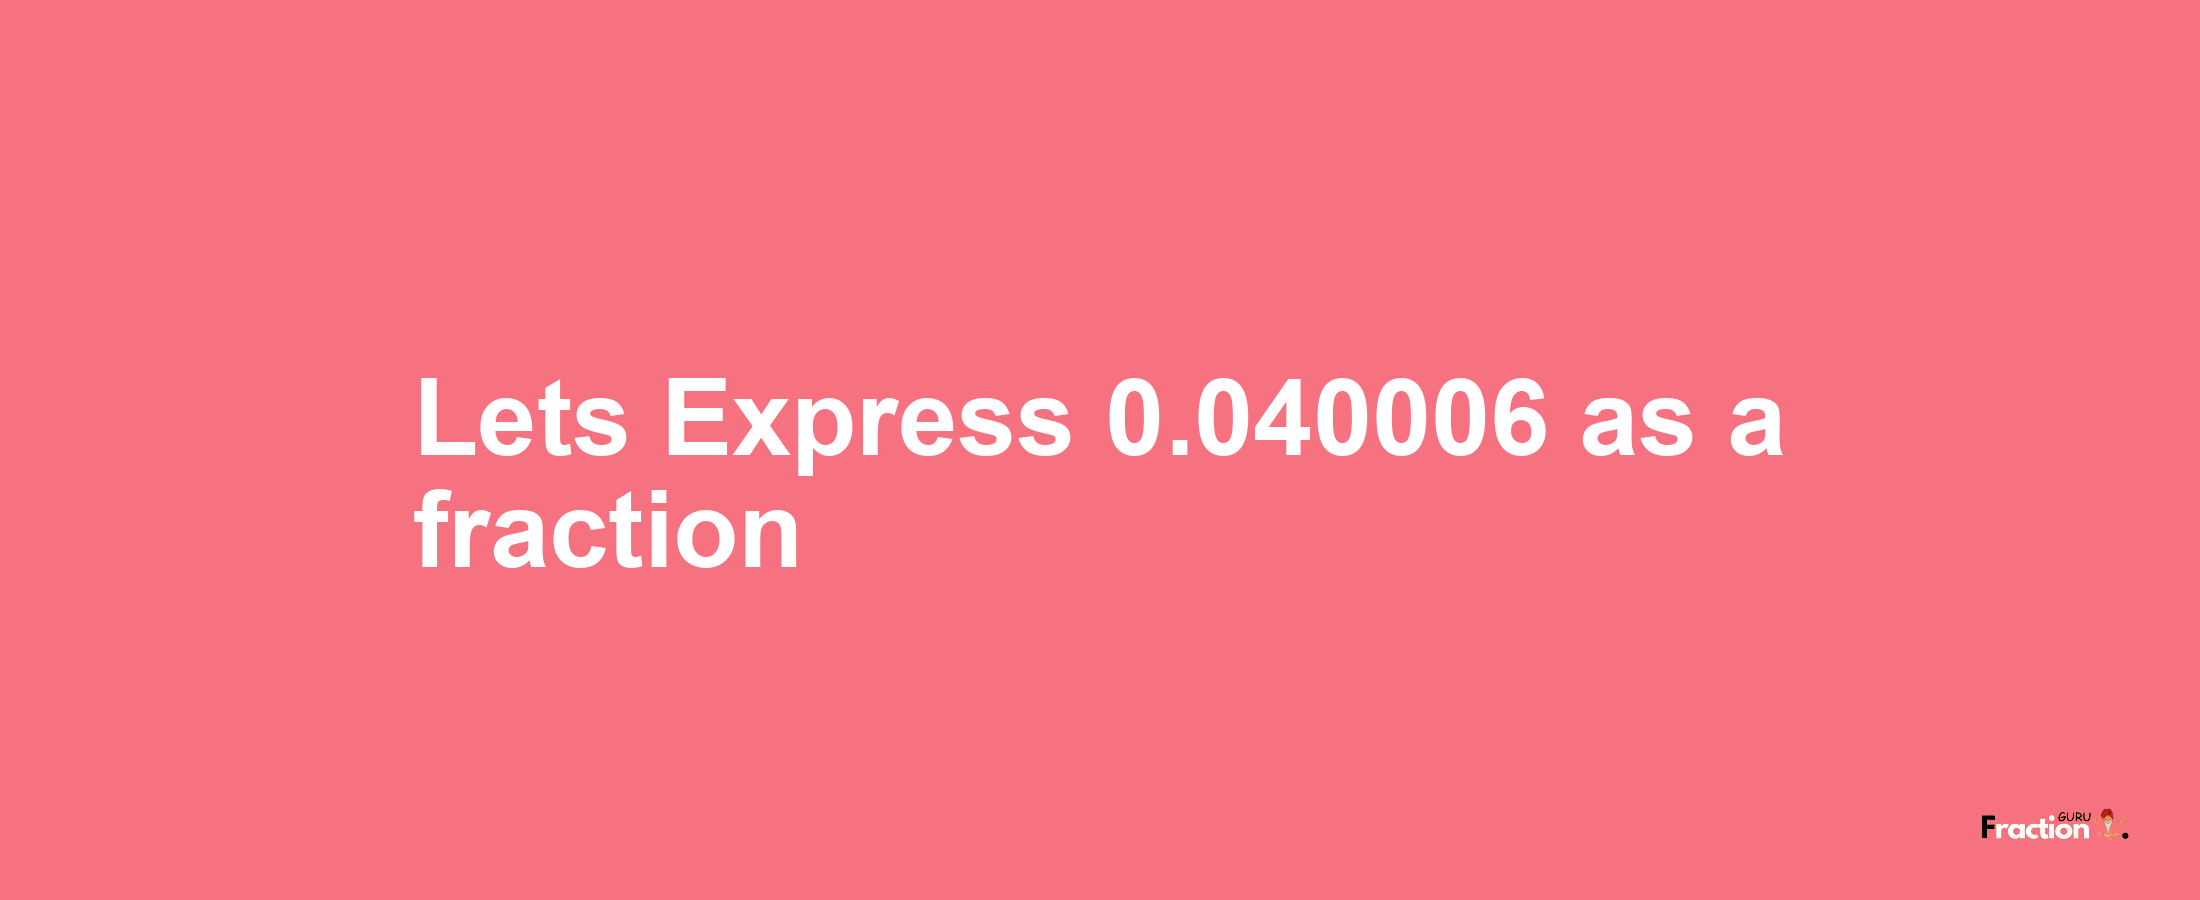 Lets Express 0.040006 as afraction